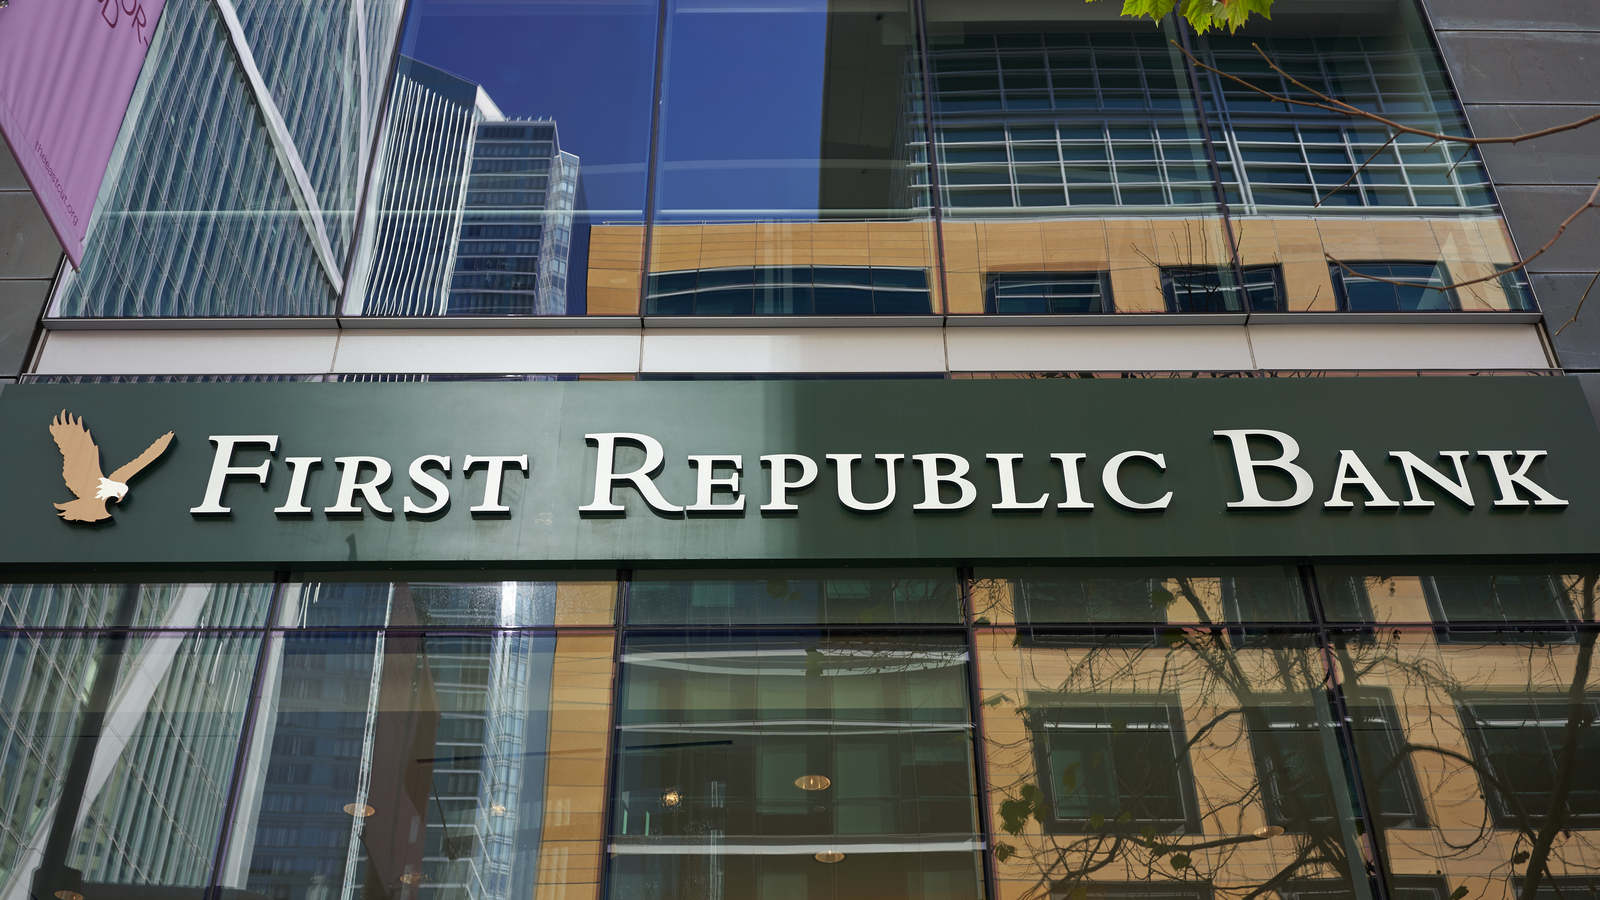 A First Republic Bank (FRC) branch in the Financial District of San Francisco, California